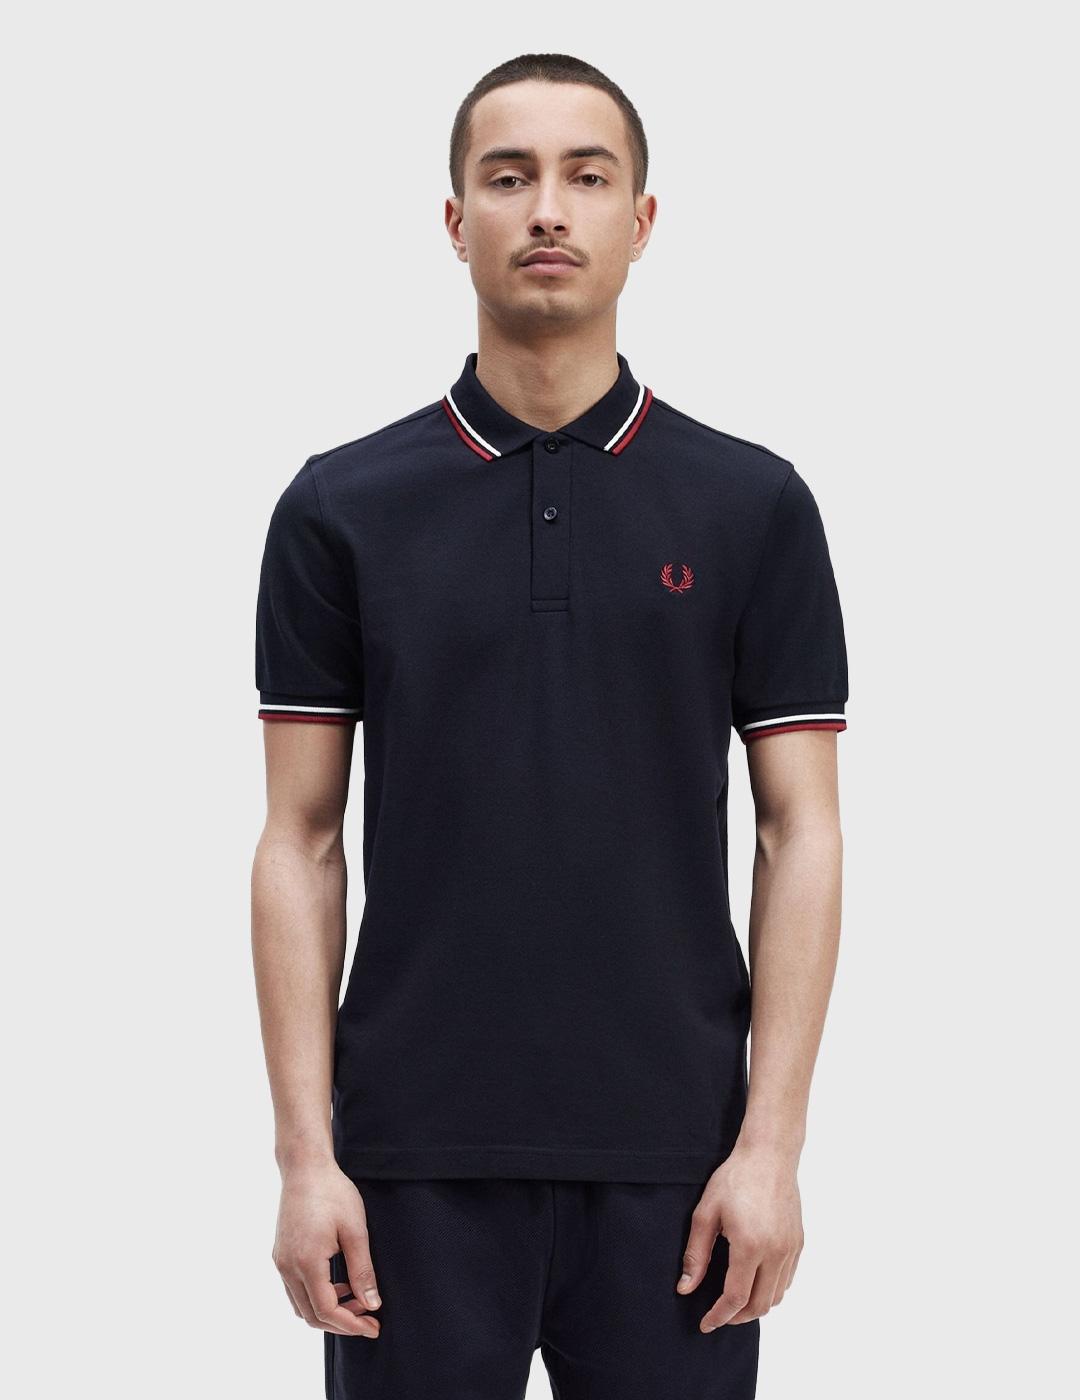 Fred Perry Twin Tipped Shirt marino para hombre